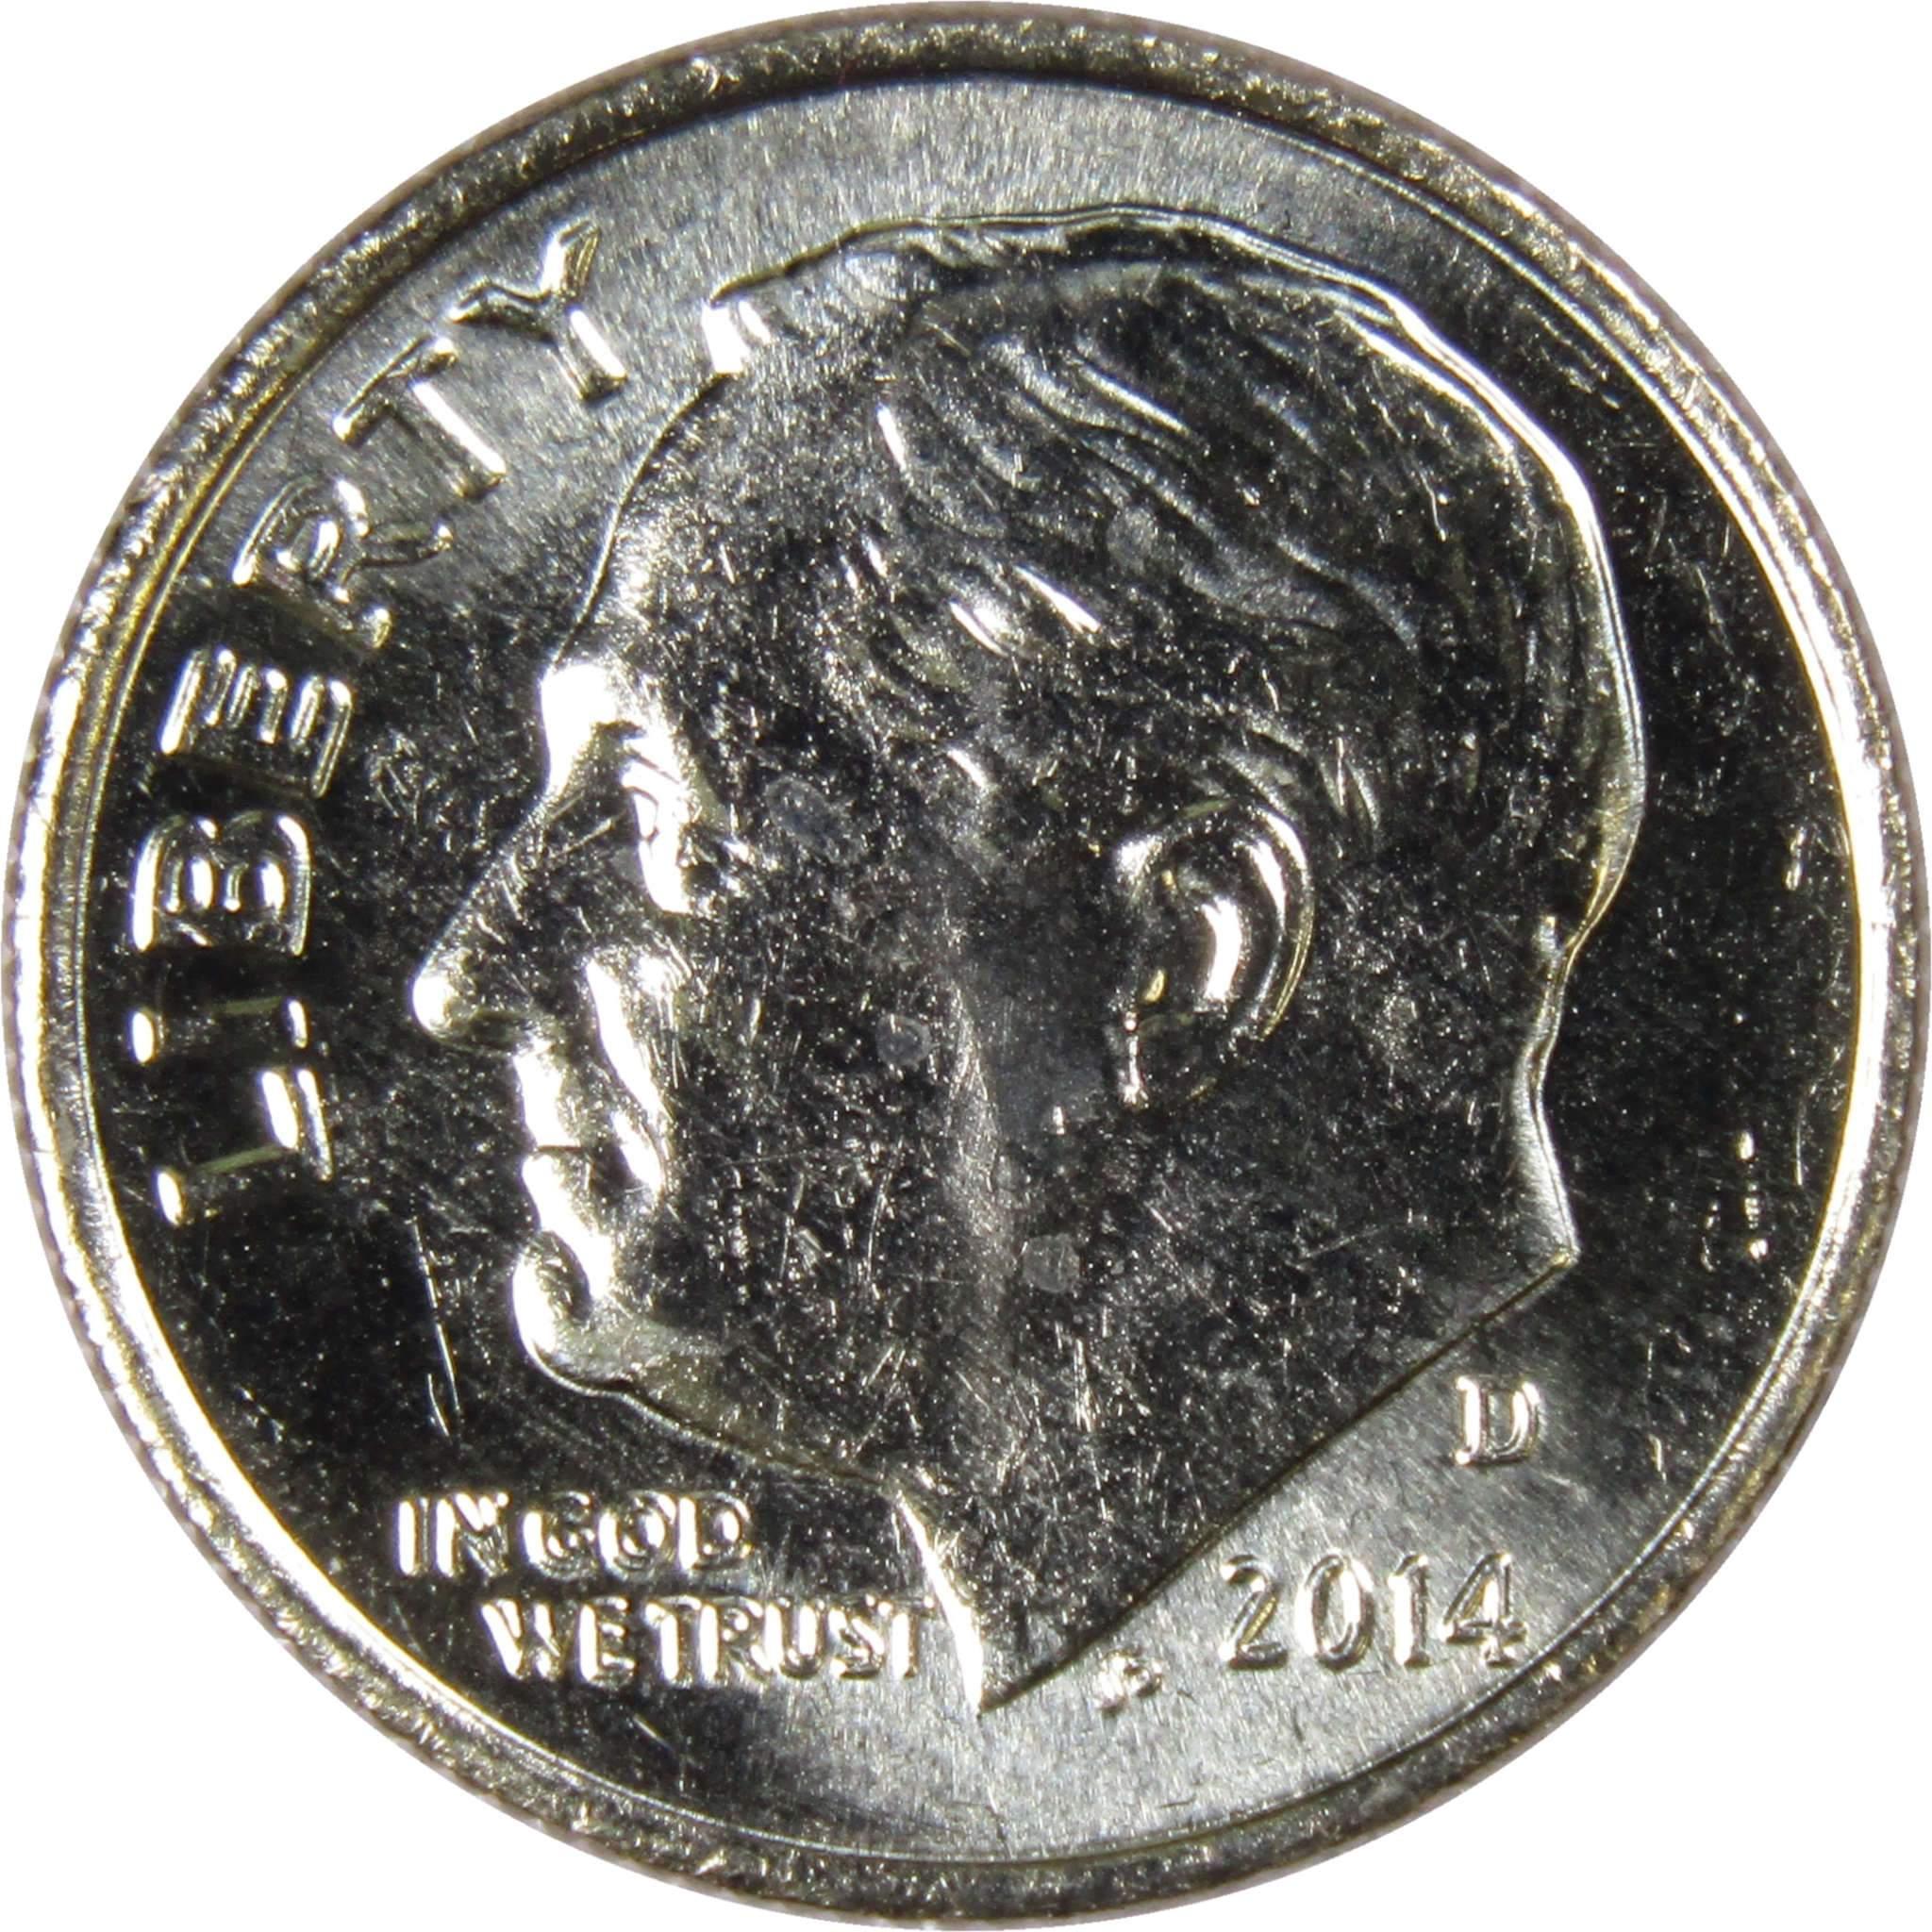 2014 D Roosevelt Dime BU Uncirculated Mint State 10c US Coin Collectible